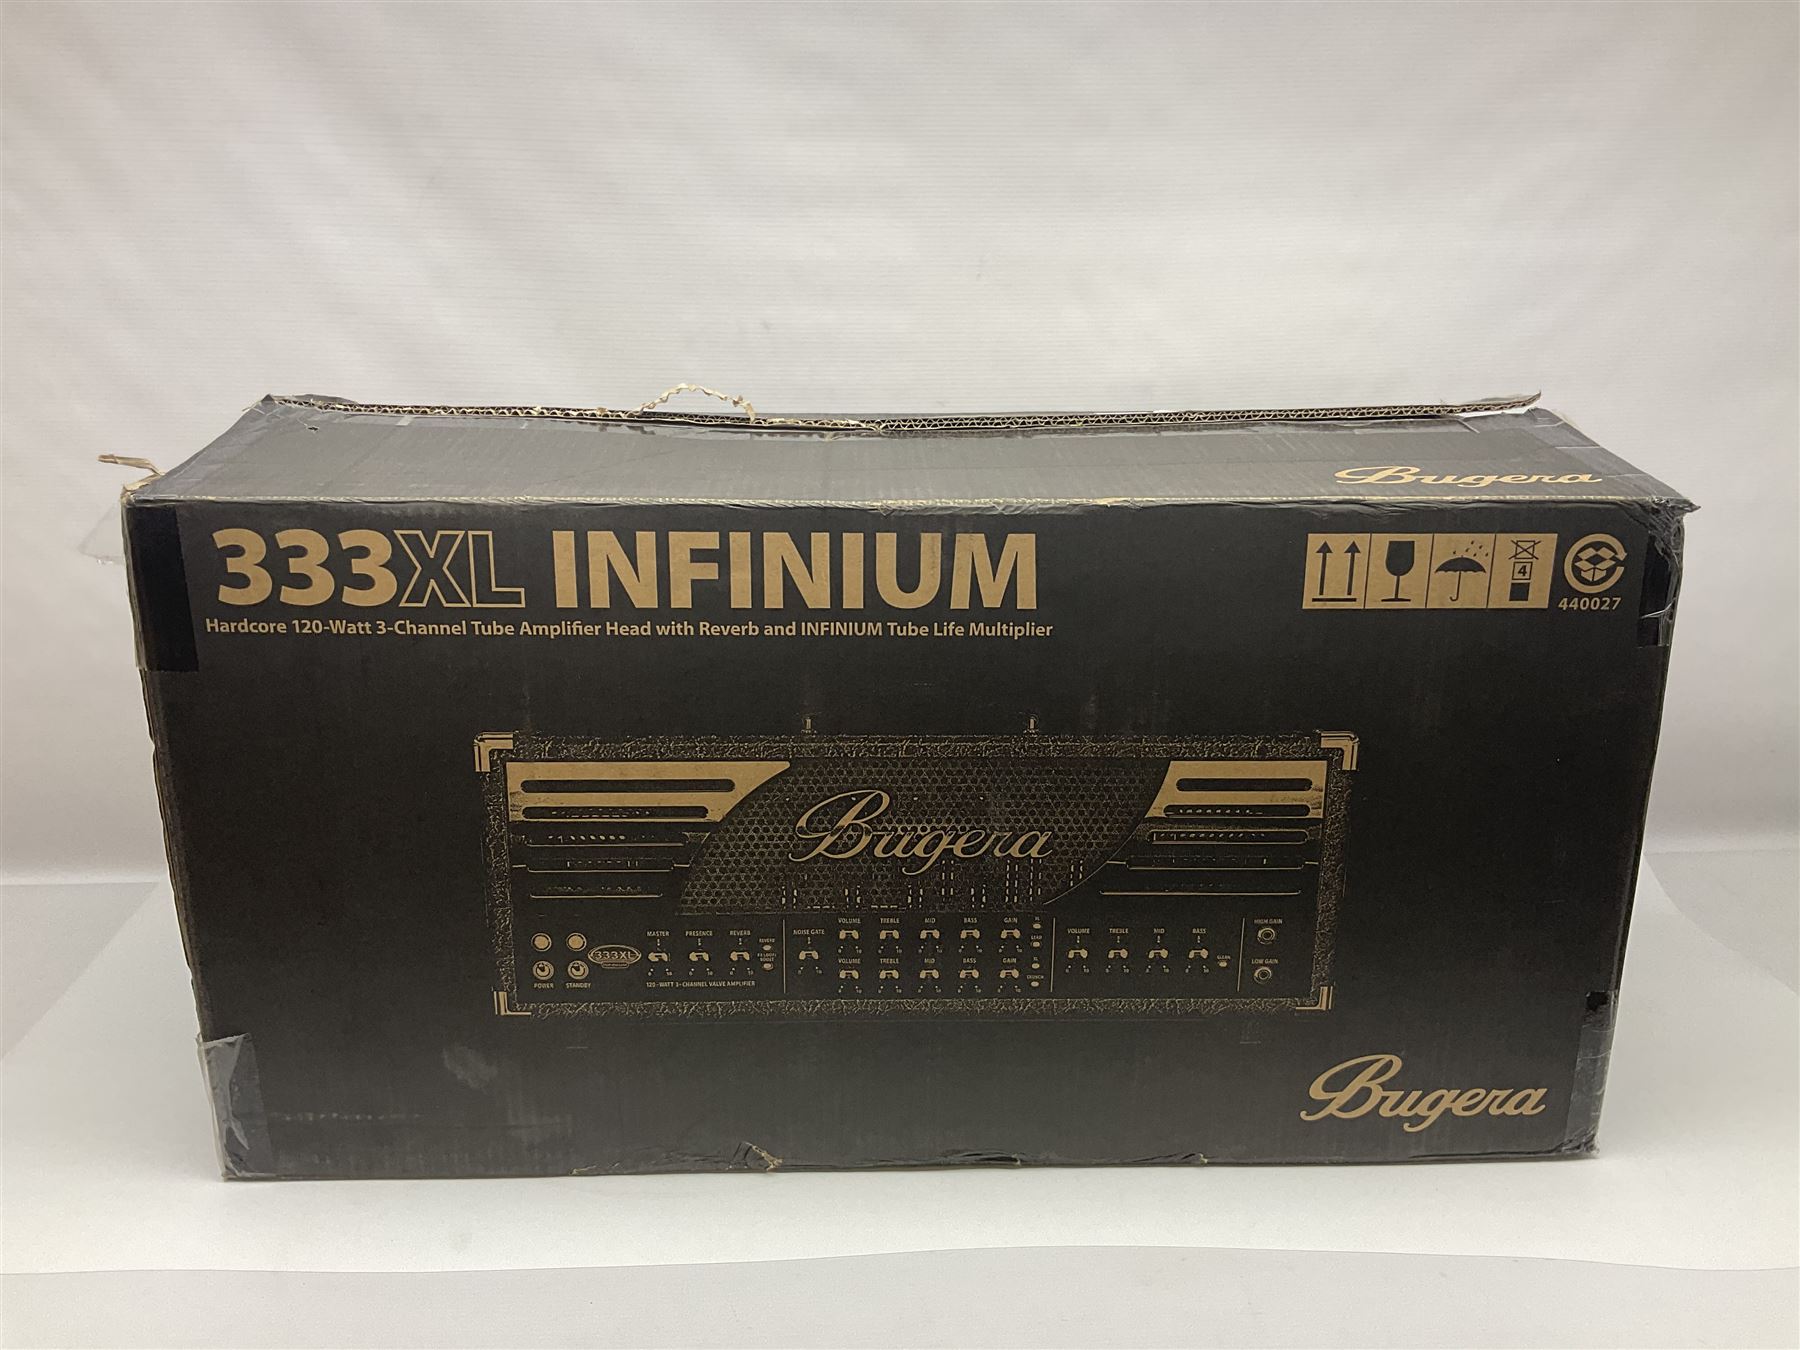 As new Bugera 333XL Infinium Hardcore 120-watt 3-channel tube amplifier head with reverb and Infiniu - Image 7 of 19